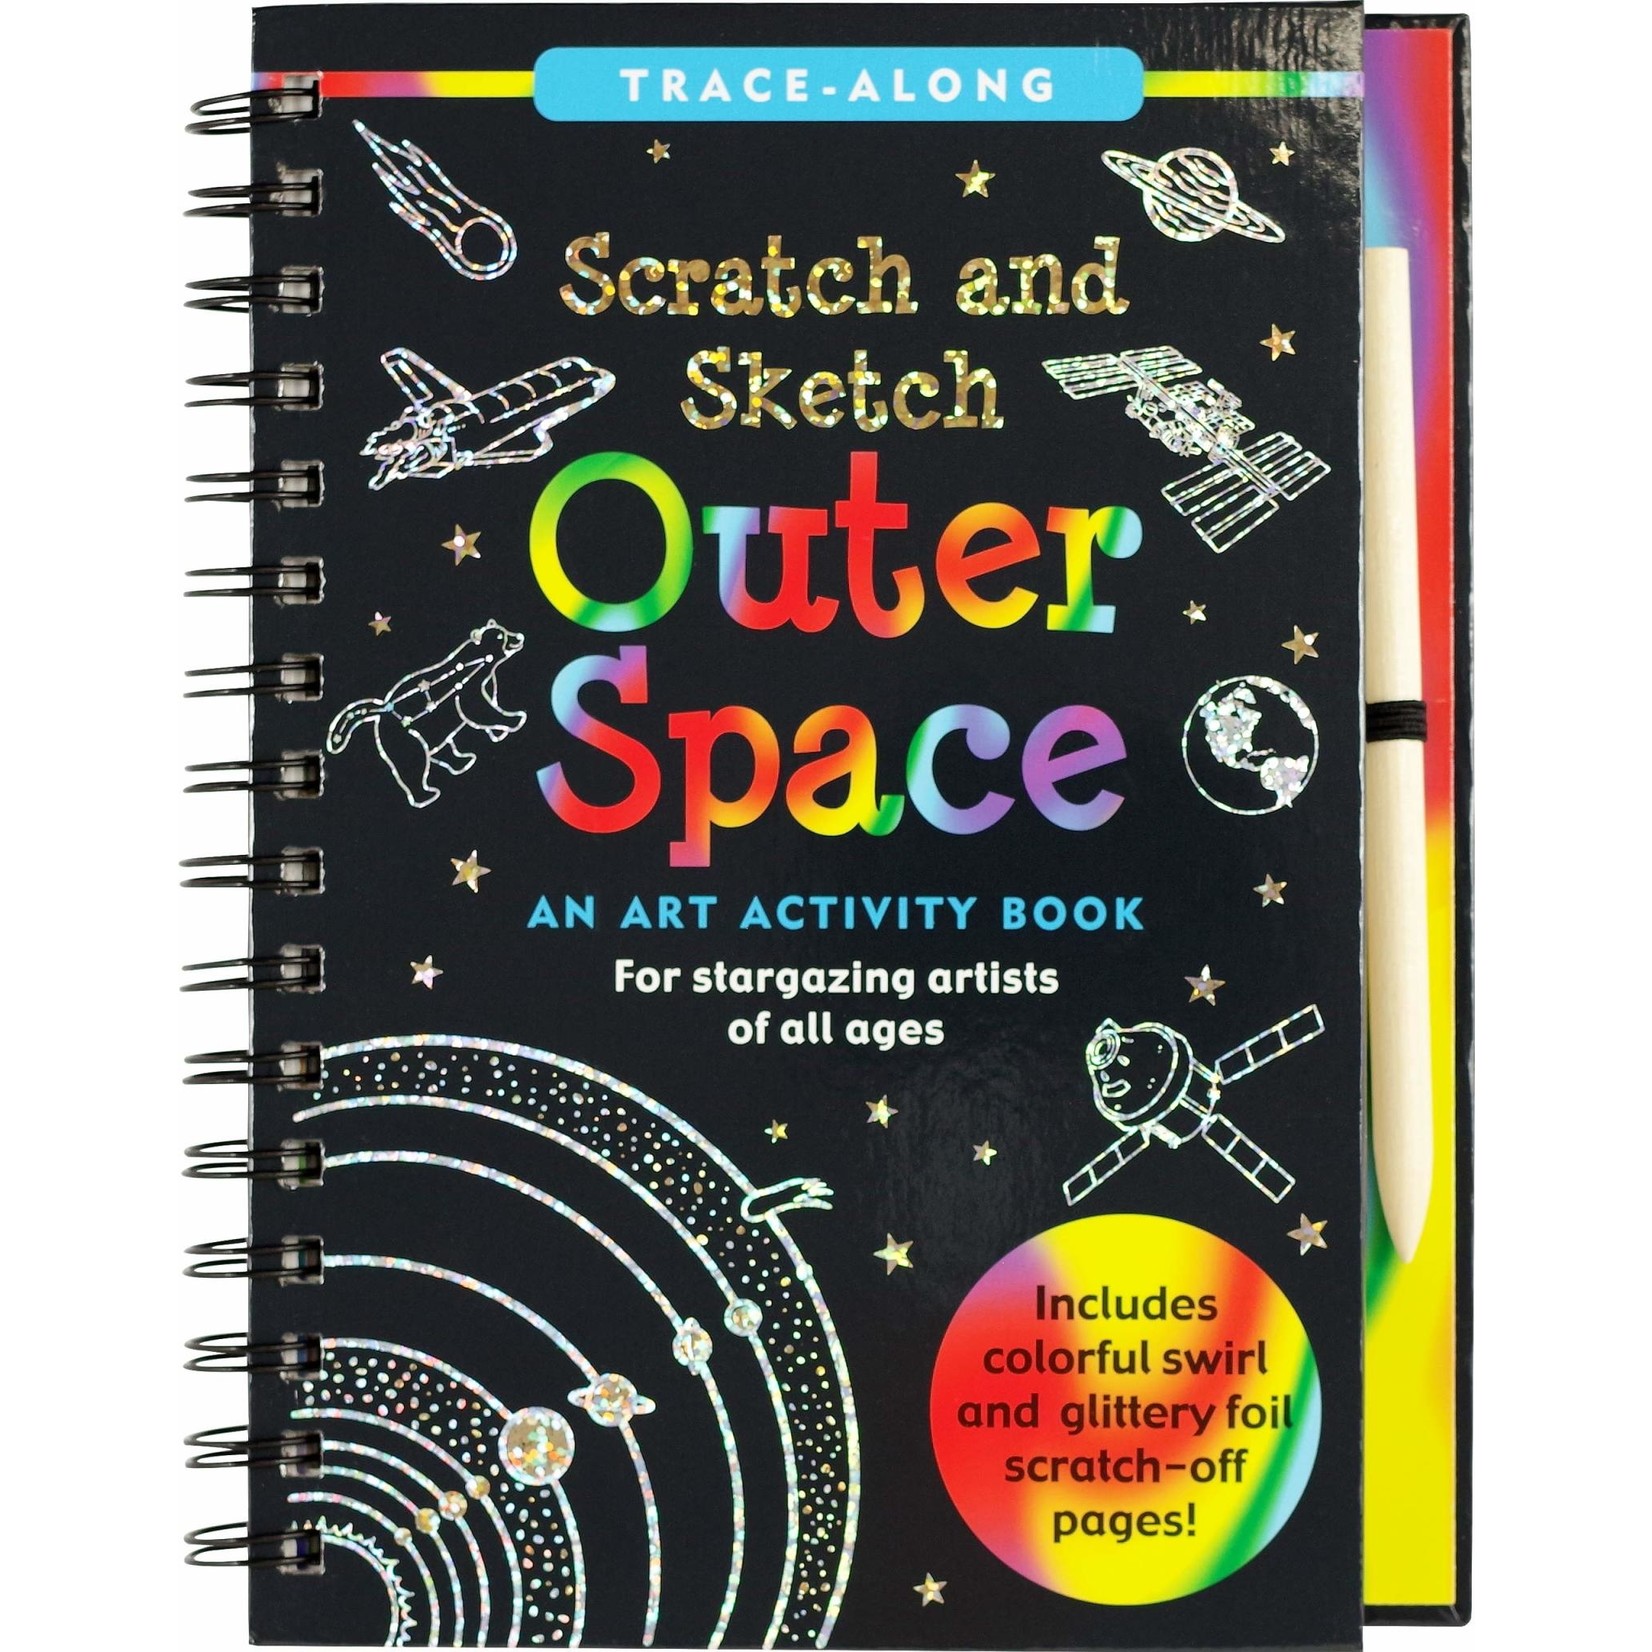 Scratch & Sketch, Outer Space (Trace-Along)